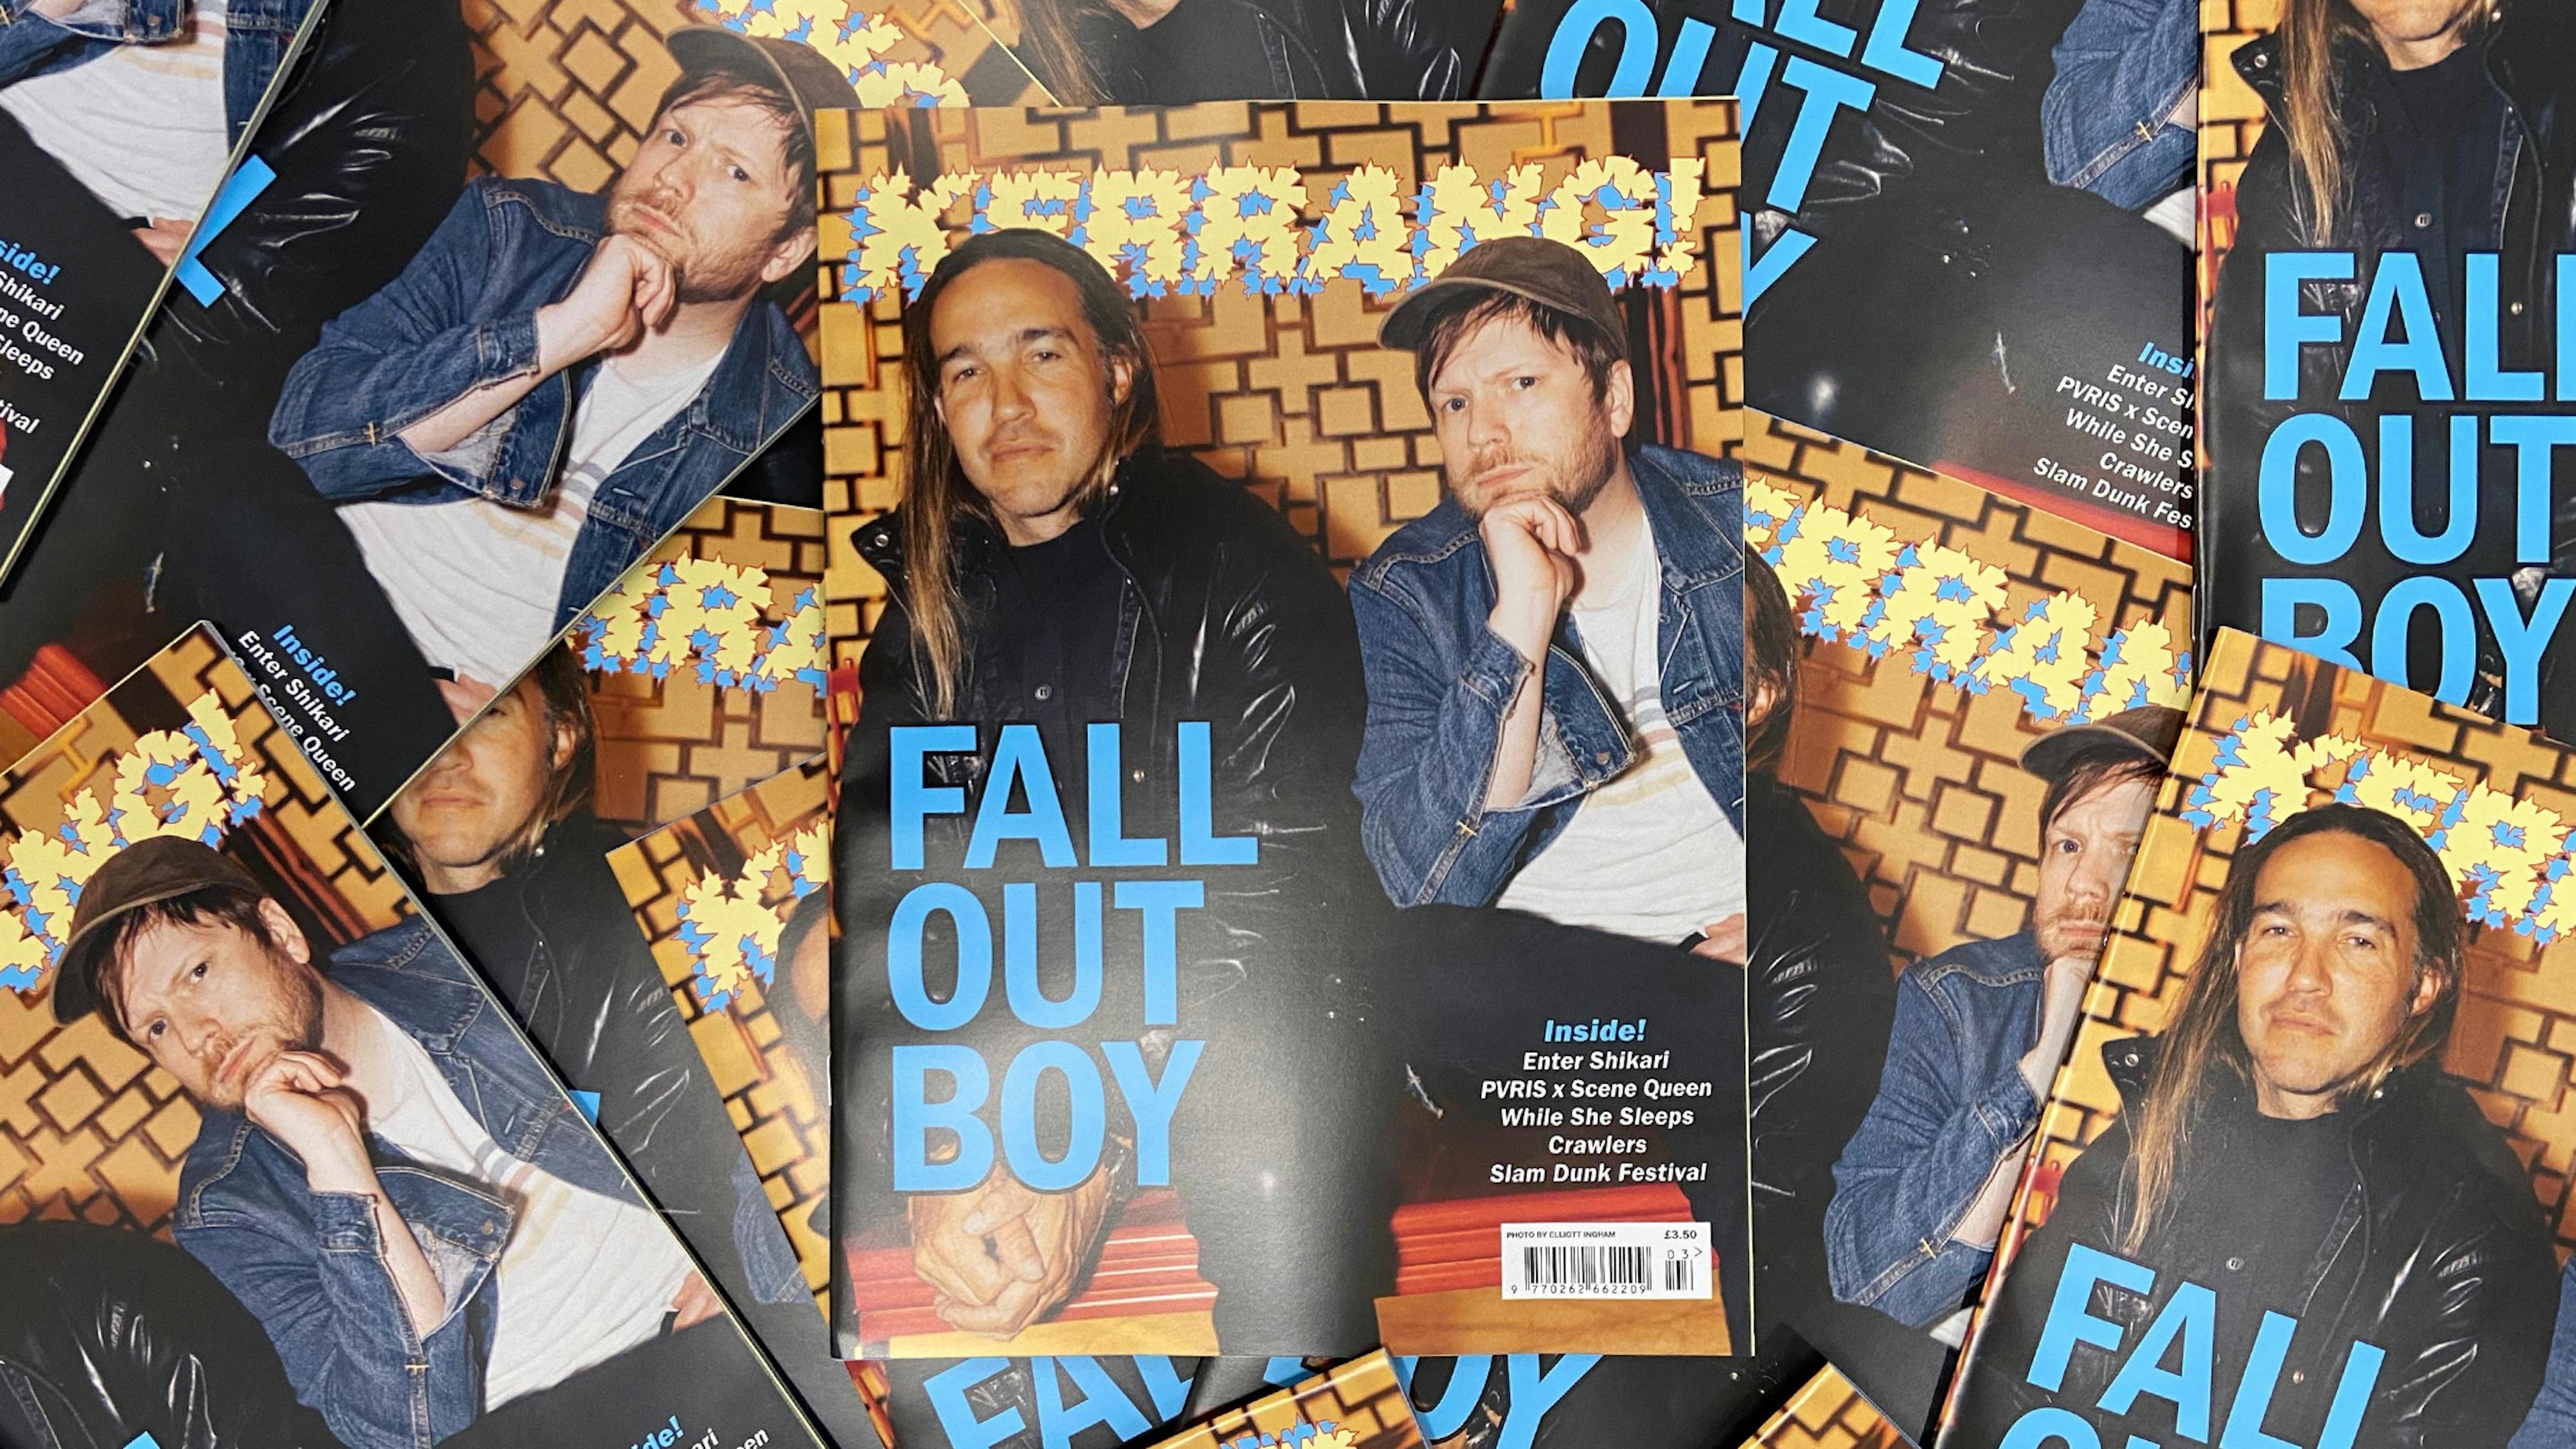 Still shooting for the stars: An exclusive catch-up with Fall Out Boy – only in the new issue of Kerrang! magazine